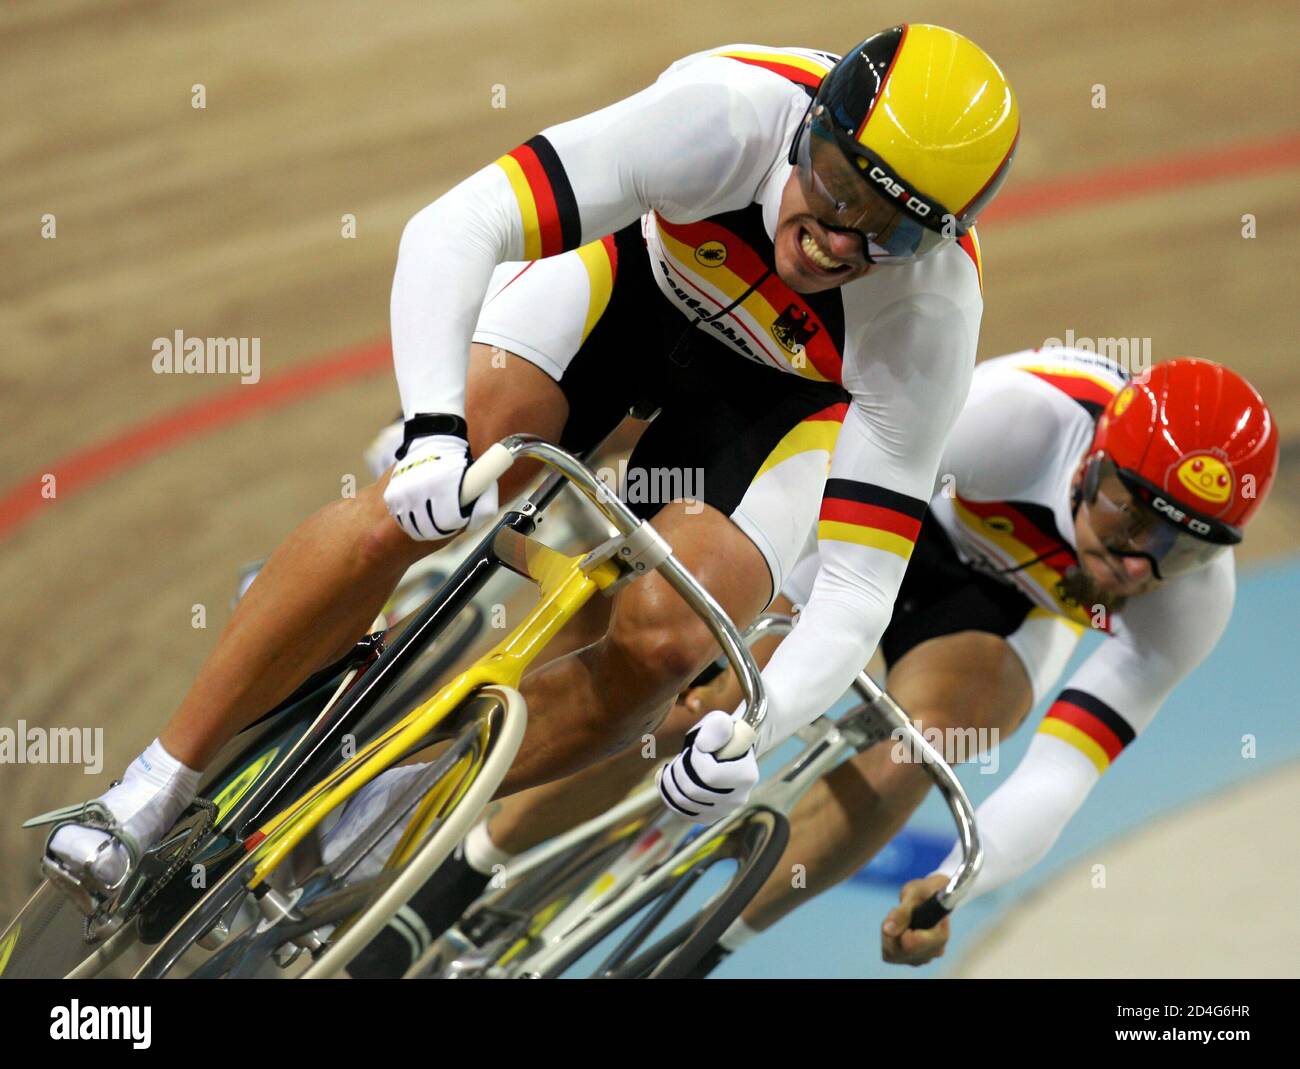 The German team competes in the men's team track cycling sprint final at the Athens 2004 Olympic Summer Games August 21, 2004. [Germany won the race, with Japan taking silver and France winning the bronze medals]. Stock Photo